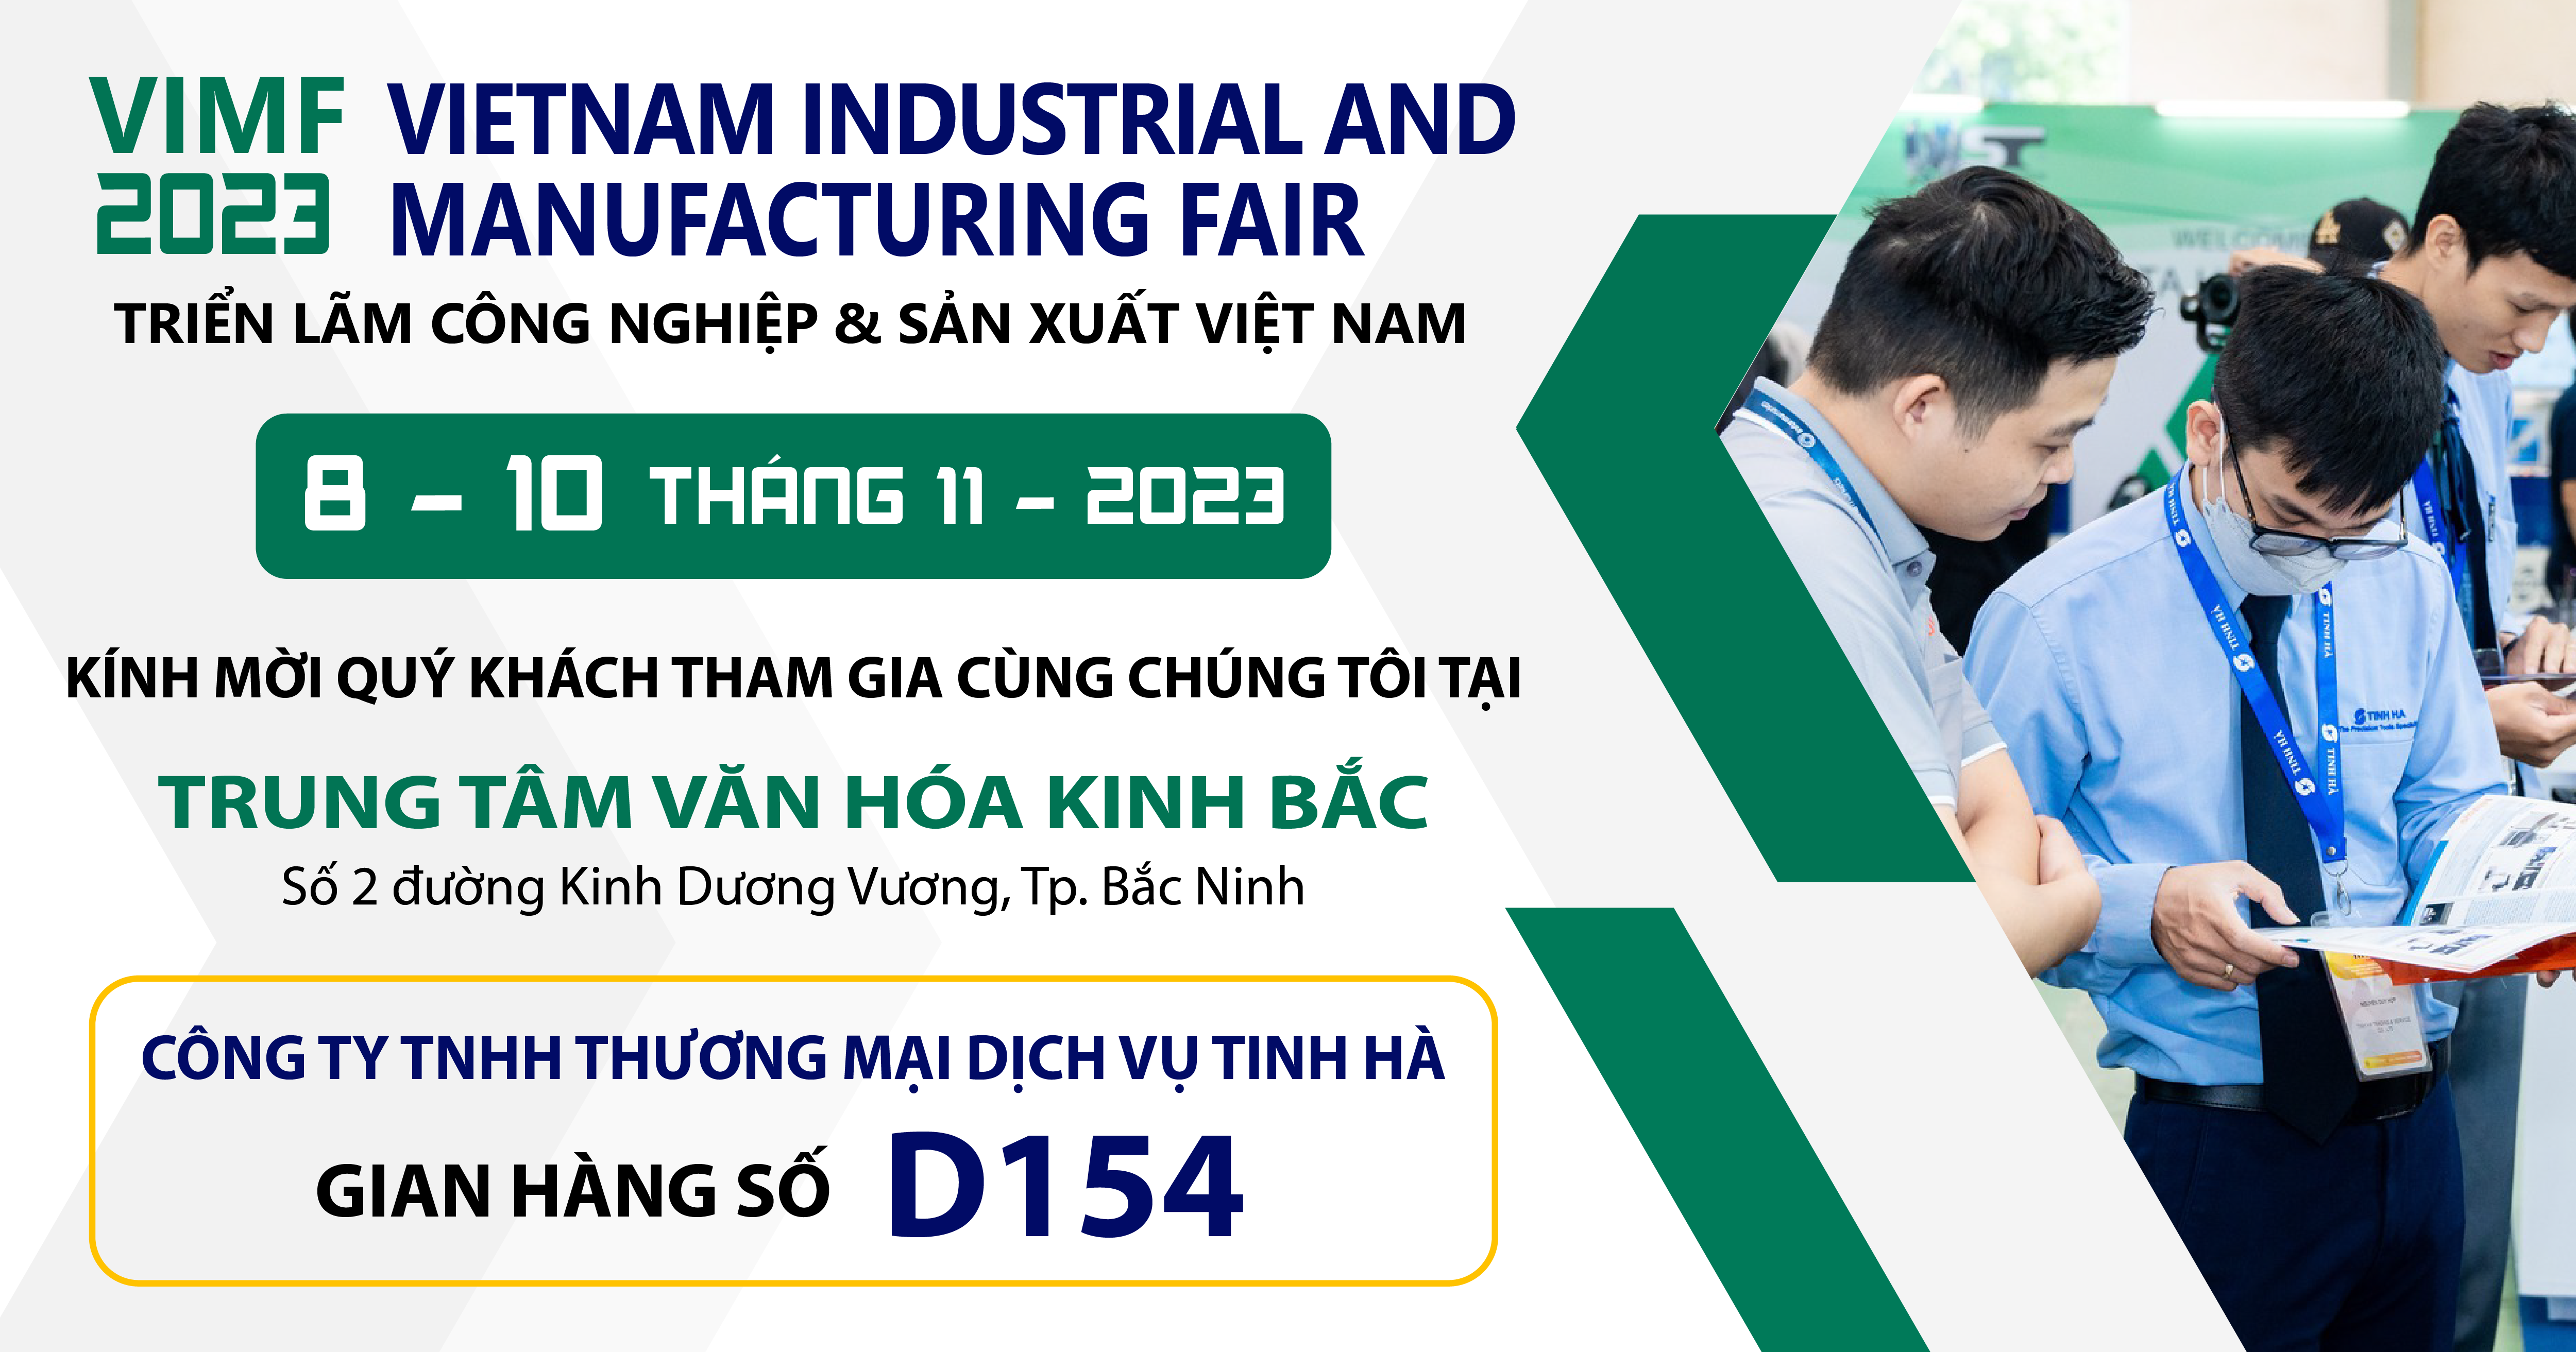 Tinh Ha cordially invite you to join us at the VIMF Bac Ninh 2023 exhibition